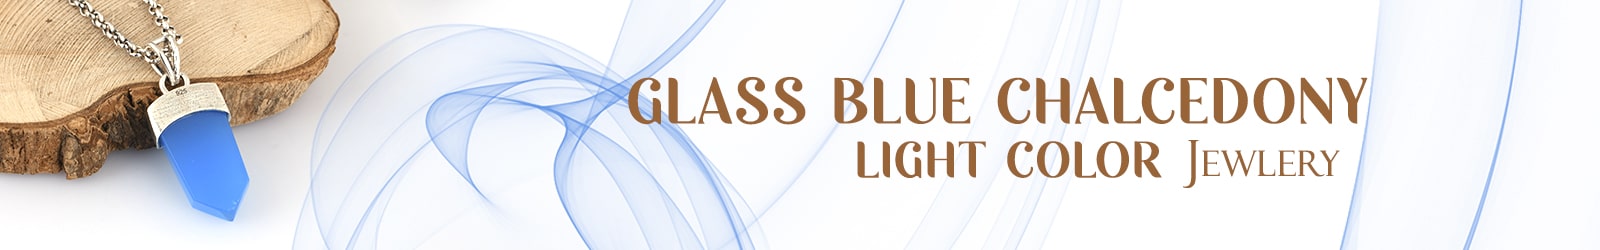 Silver Glass Blue Chalcedony Light Color Jewelry Wholesale Supplier